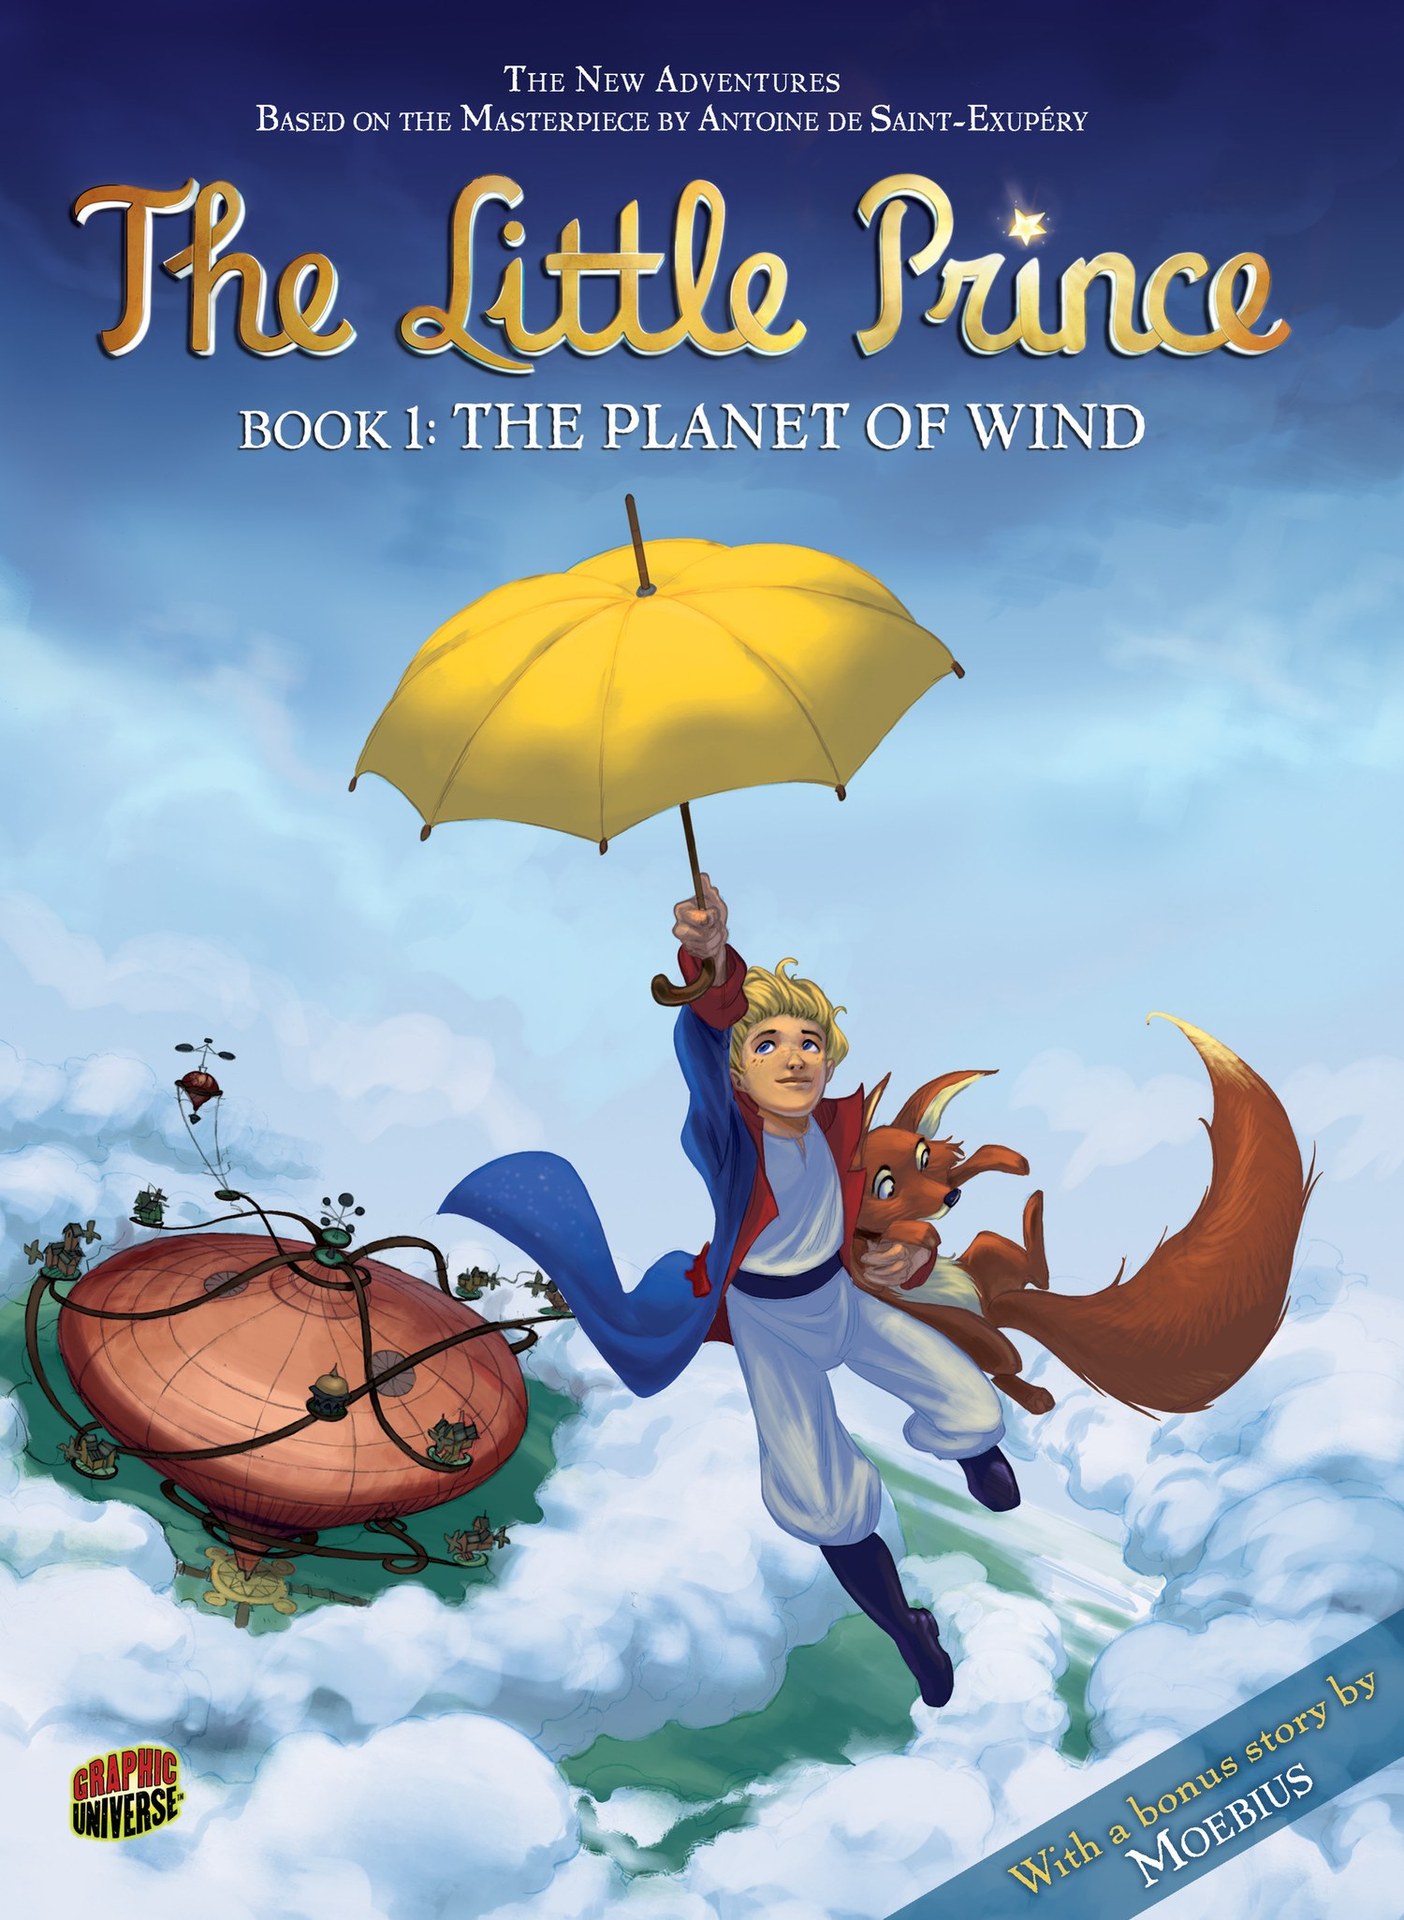 The little prince book online free